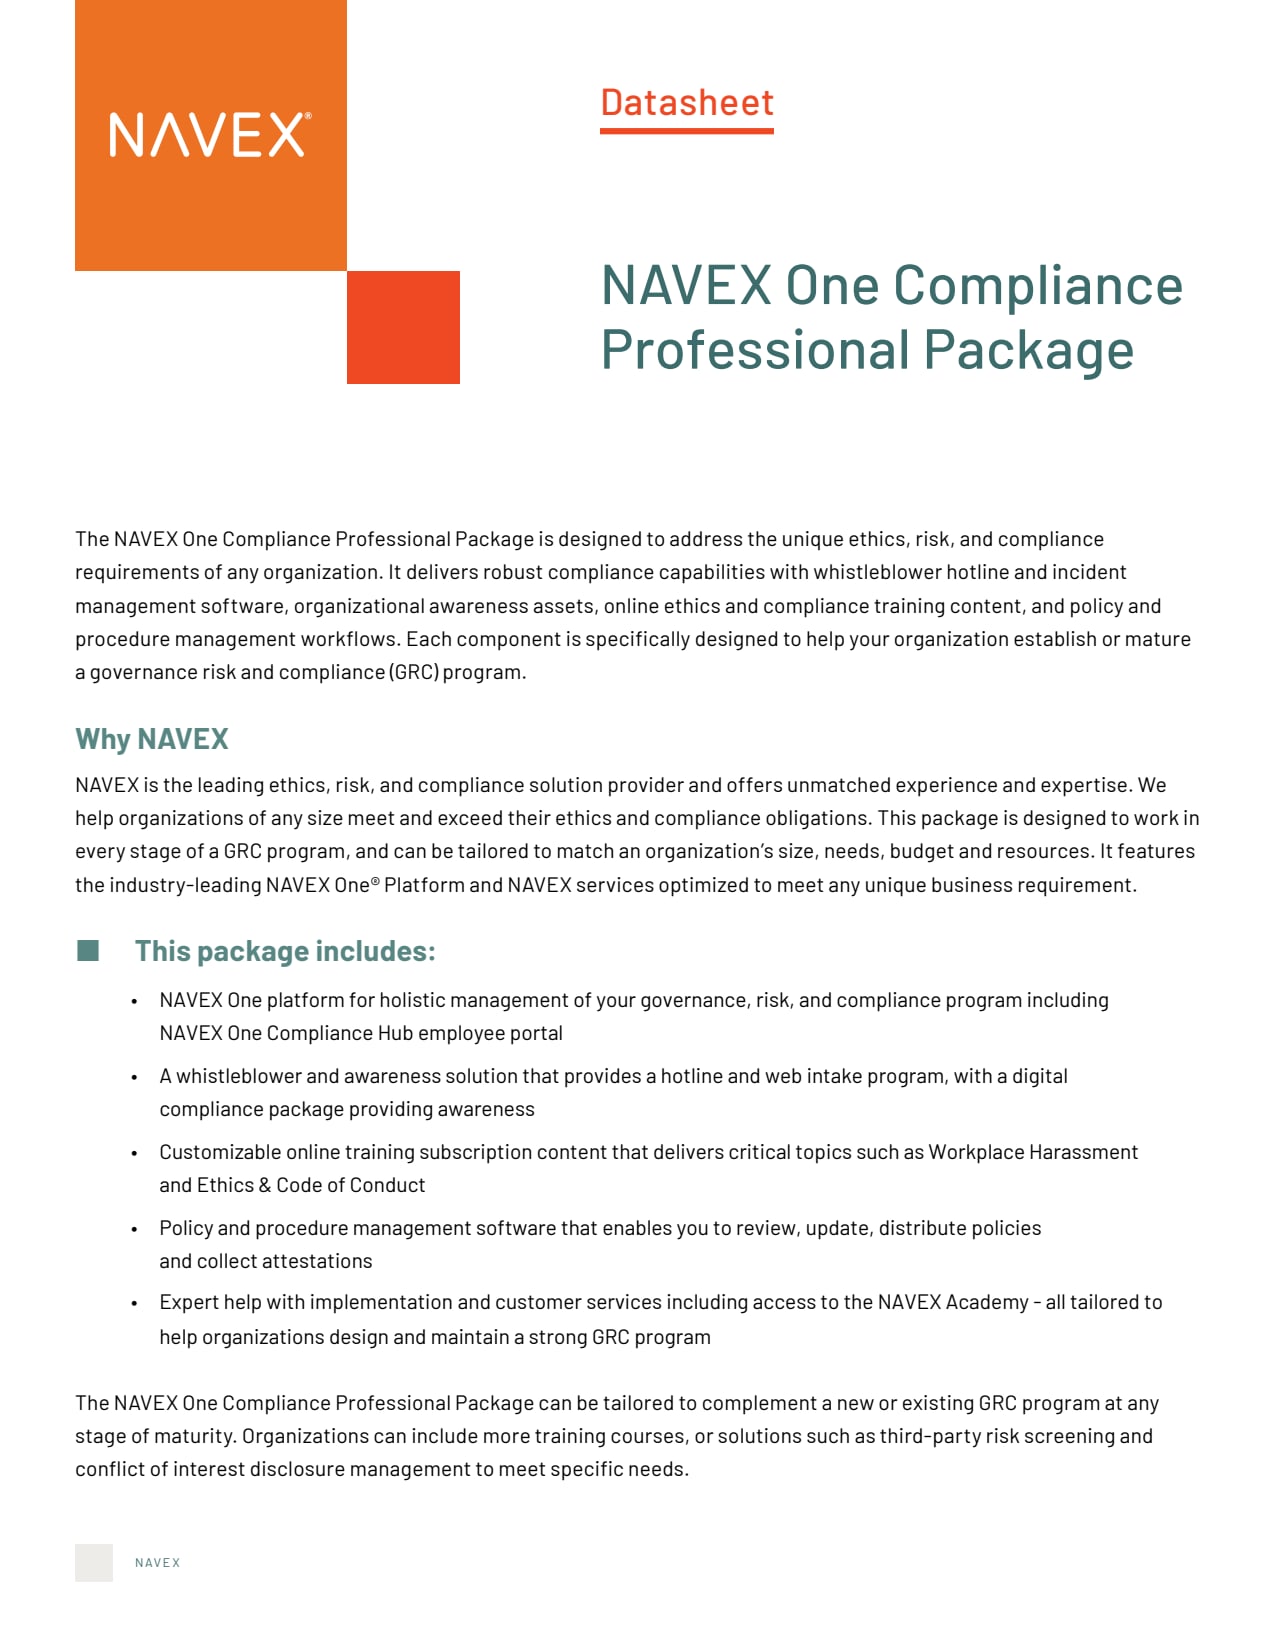 NAVEX One Compliance Professional Package